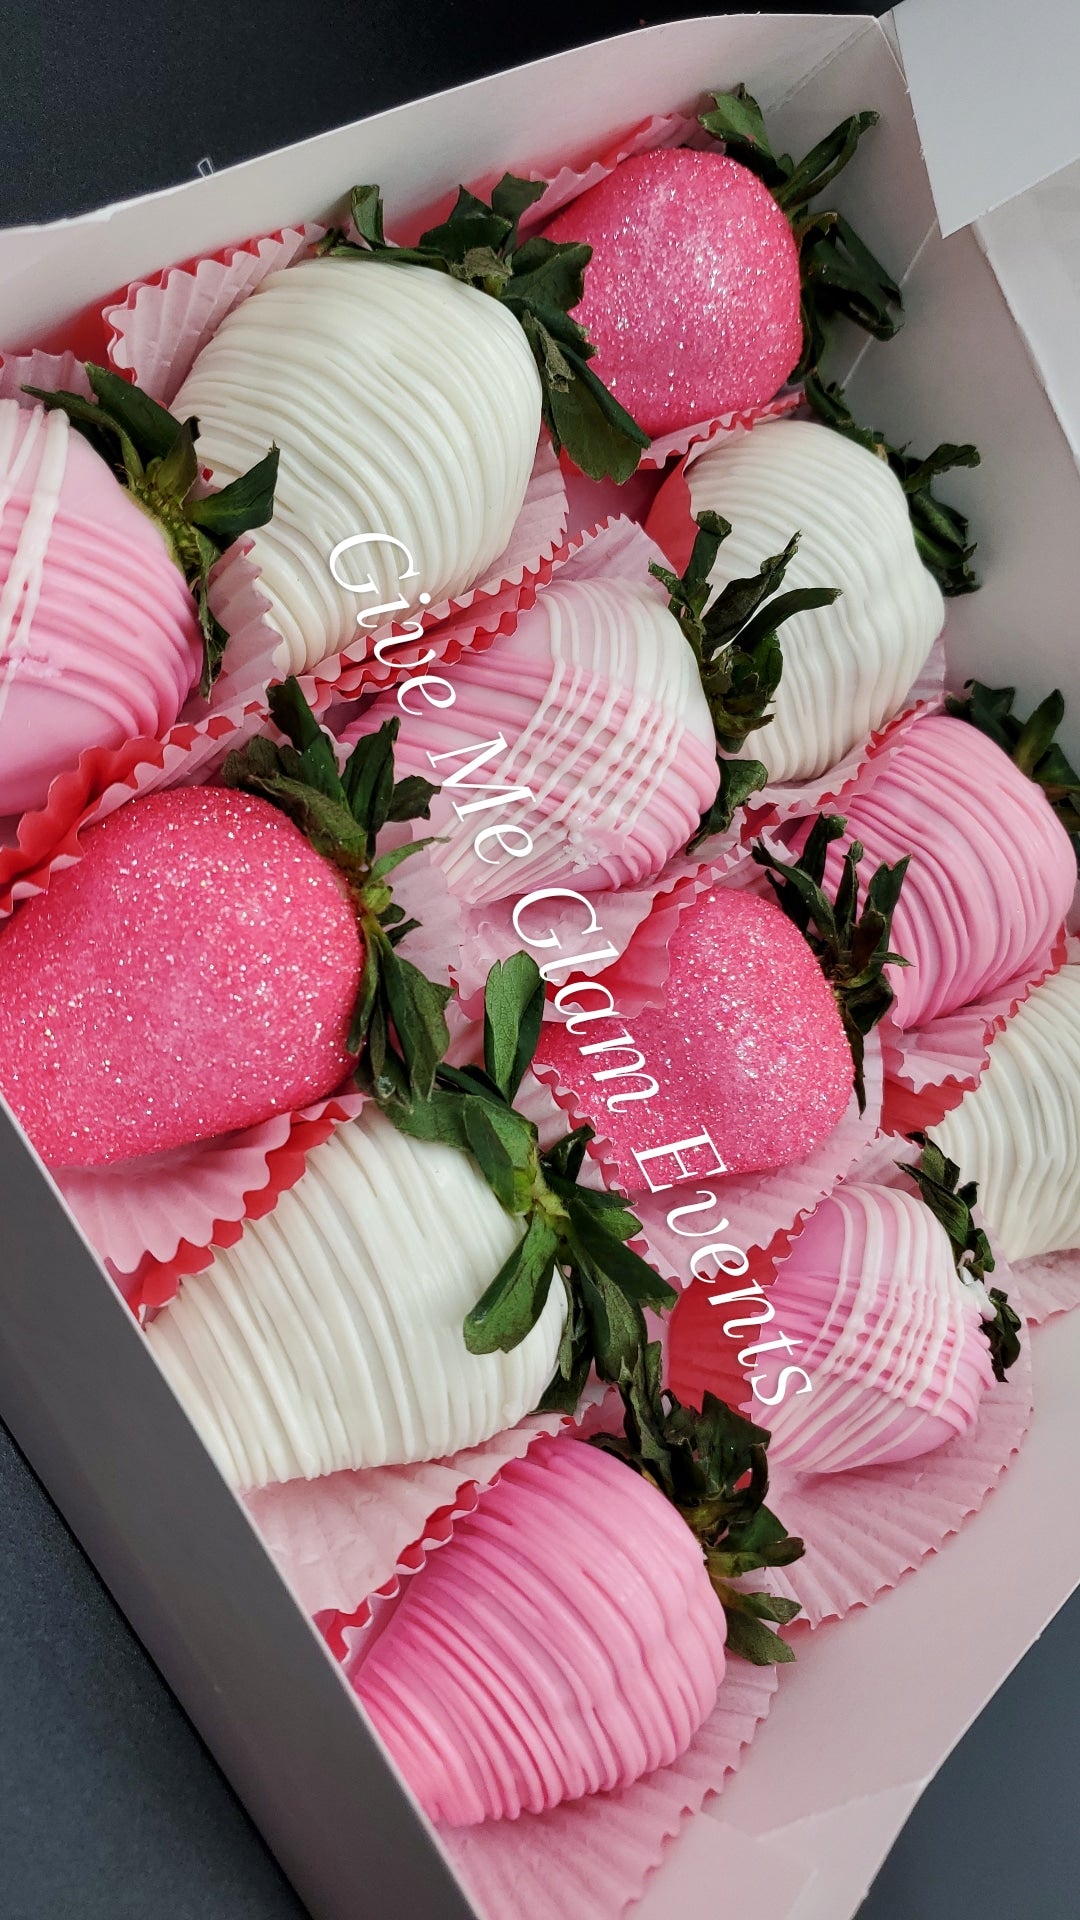 chocolate covered strawberry ideas for valentines